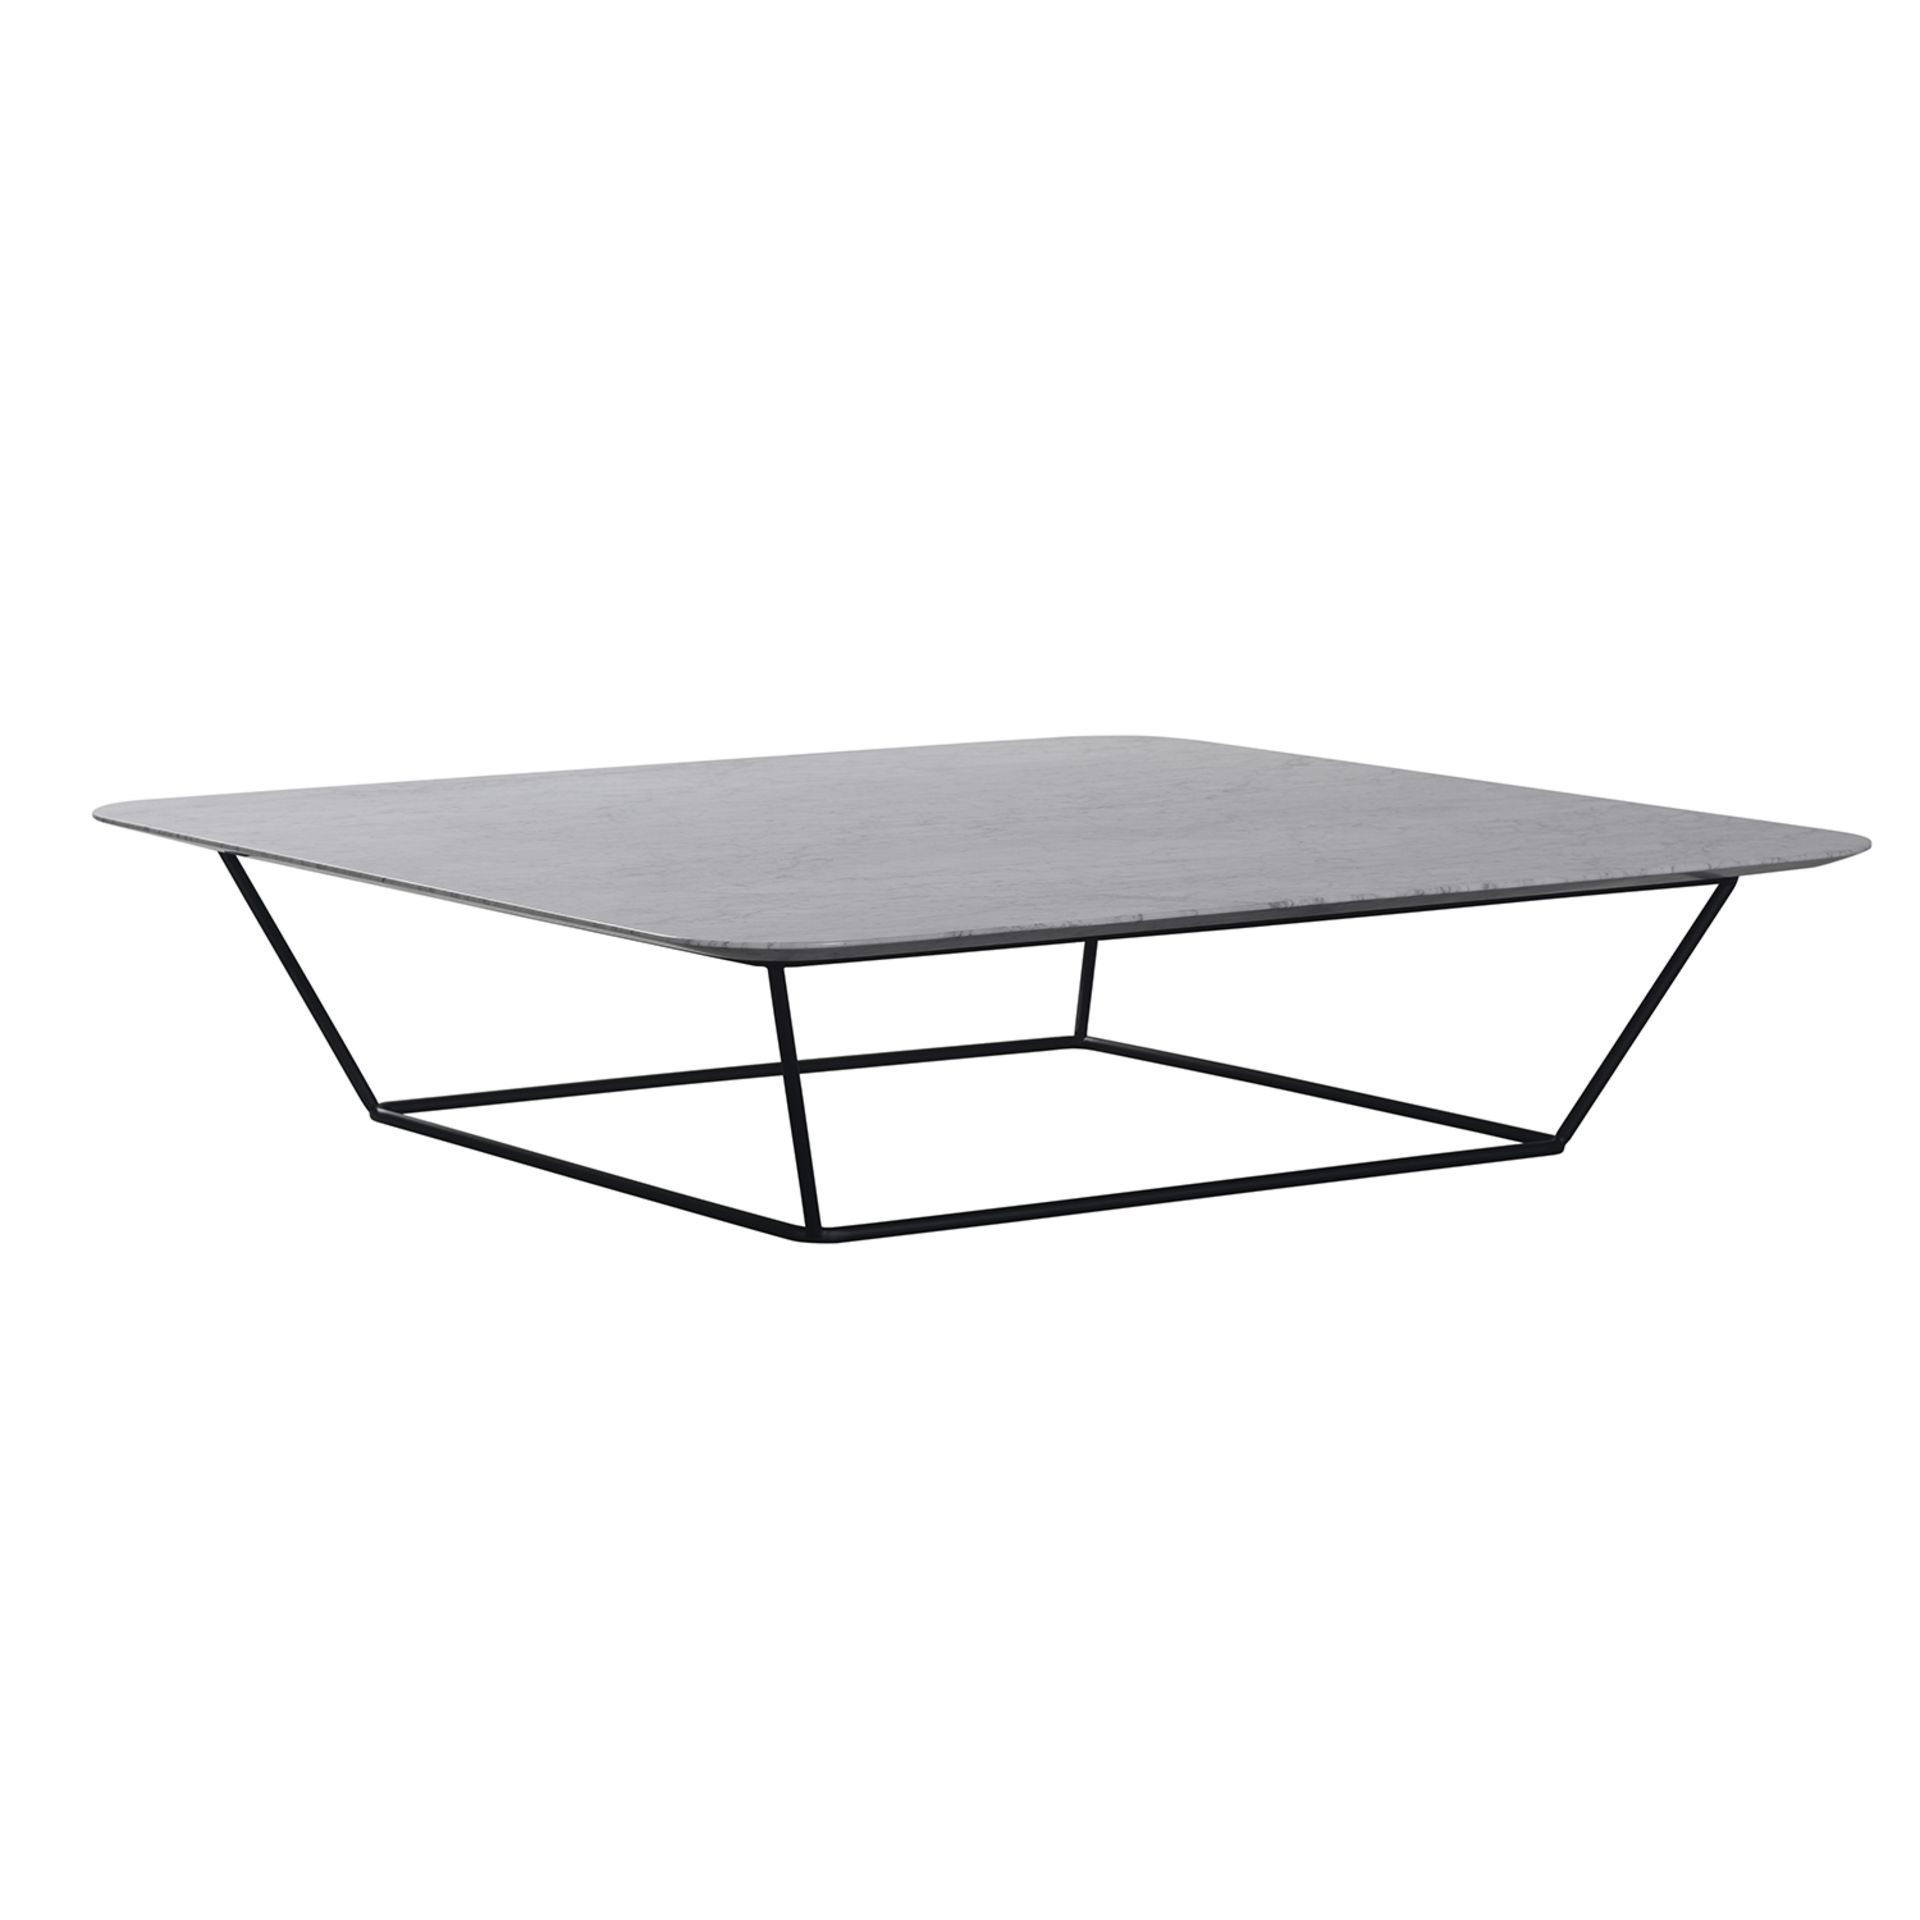 Life Coffee Table 145cm Clean Lines with Smooth Curved Edges, The Life Coffee Table in a Marble